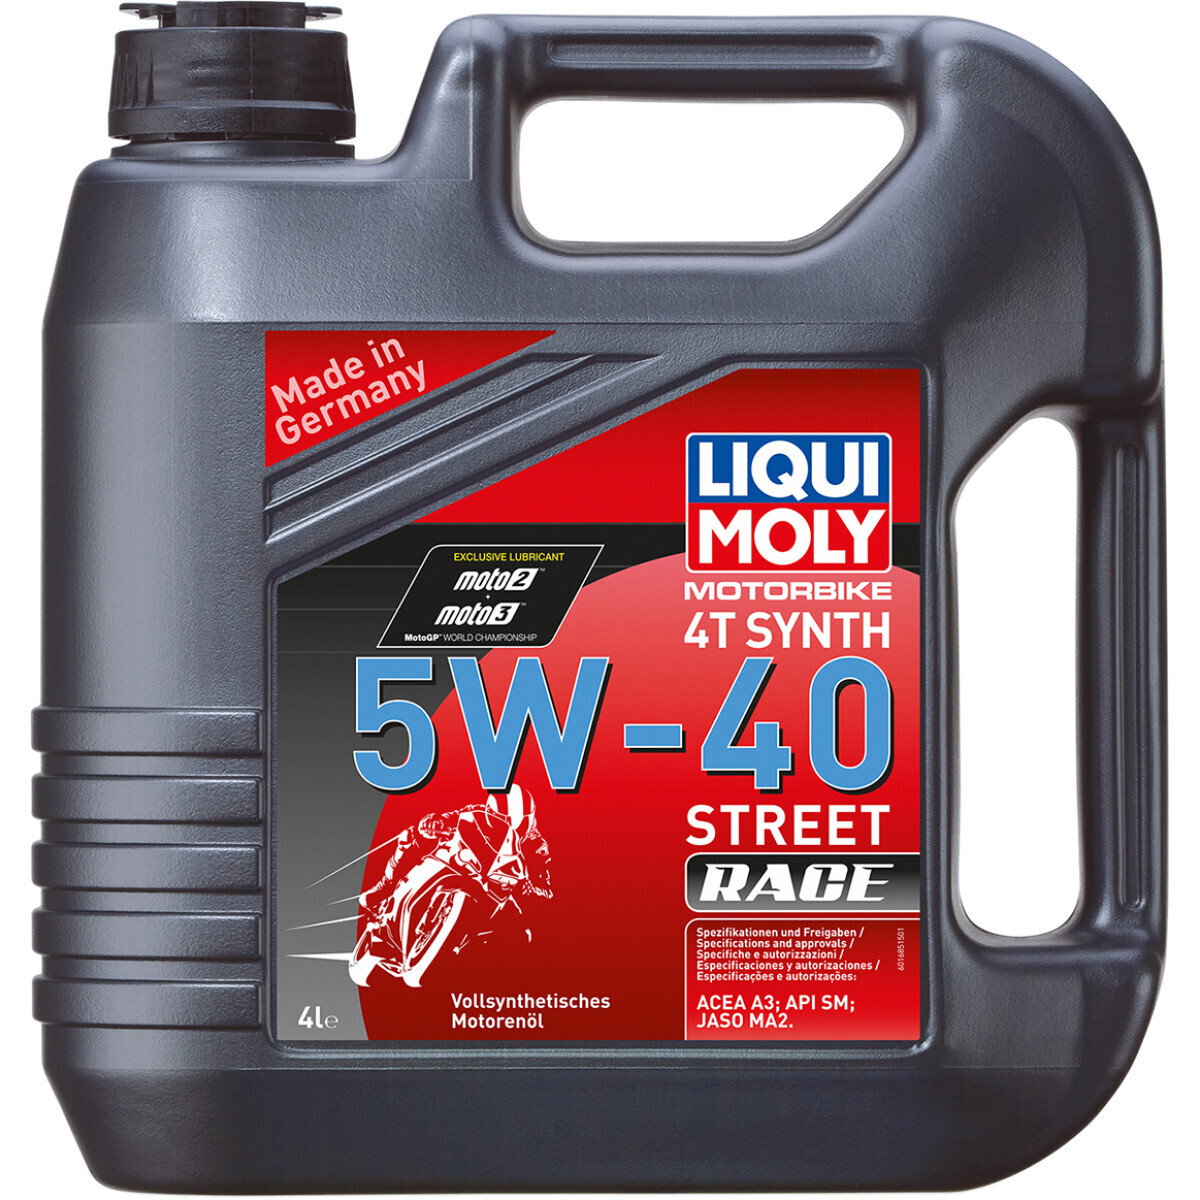 LIQUI MOLY
ENGINE OIL MOTORBIKE 4T 5W40 FULLY SYNTHETIC 4 LITER